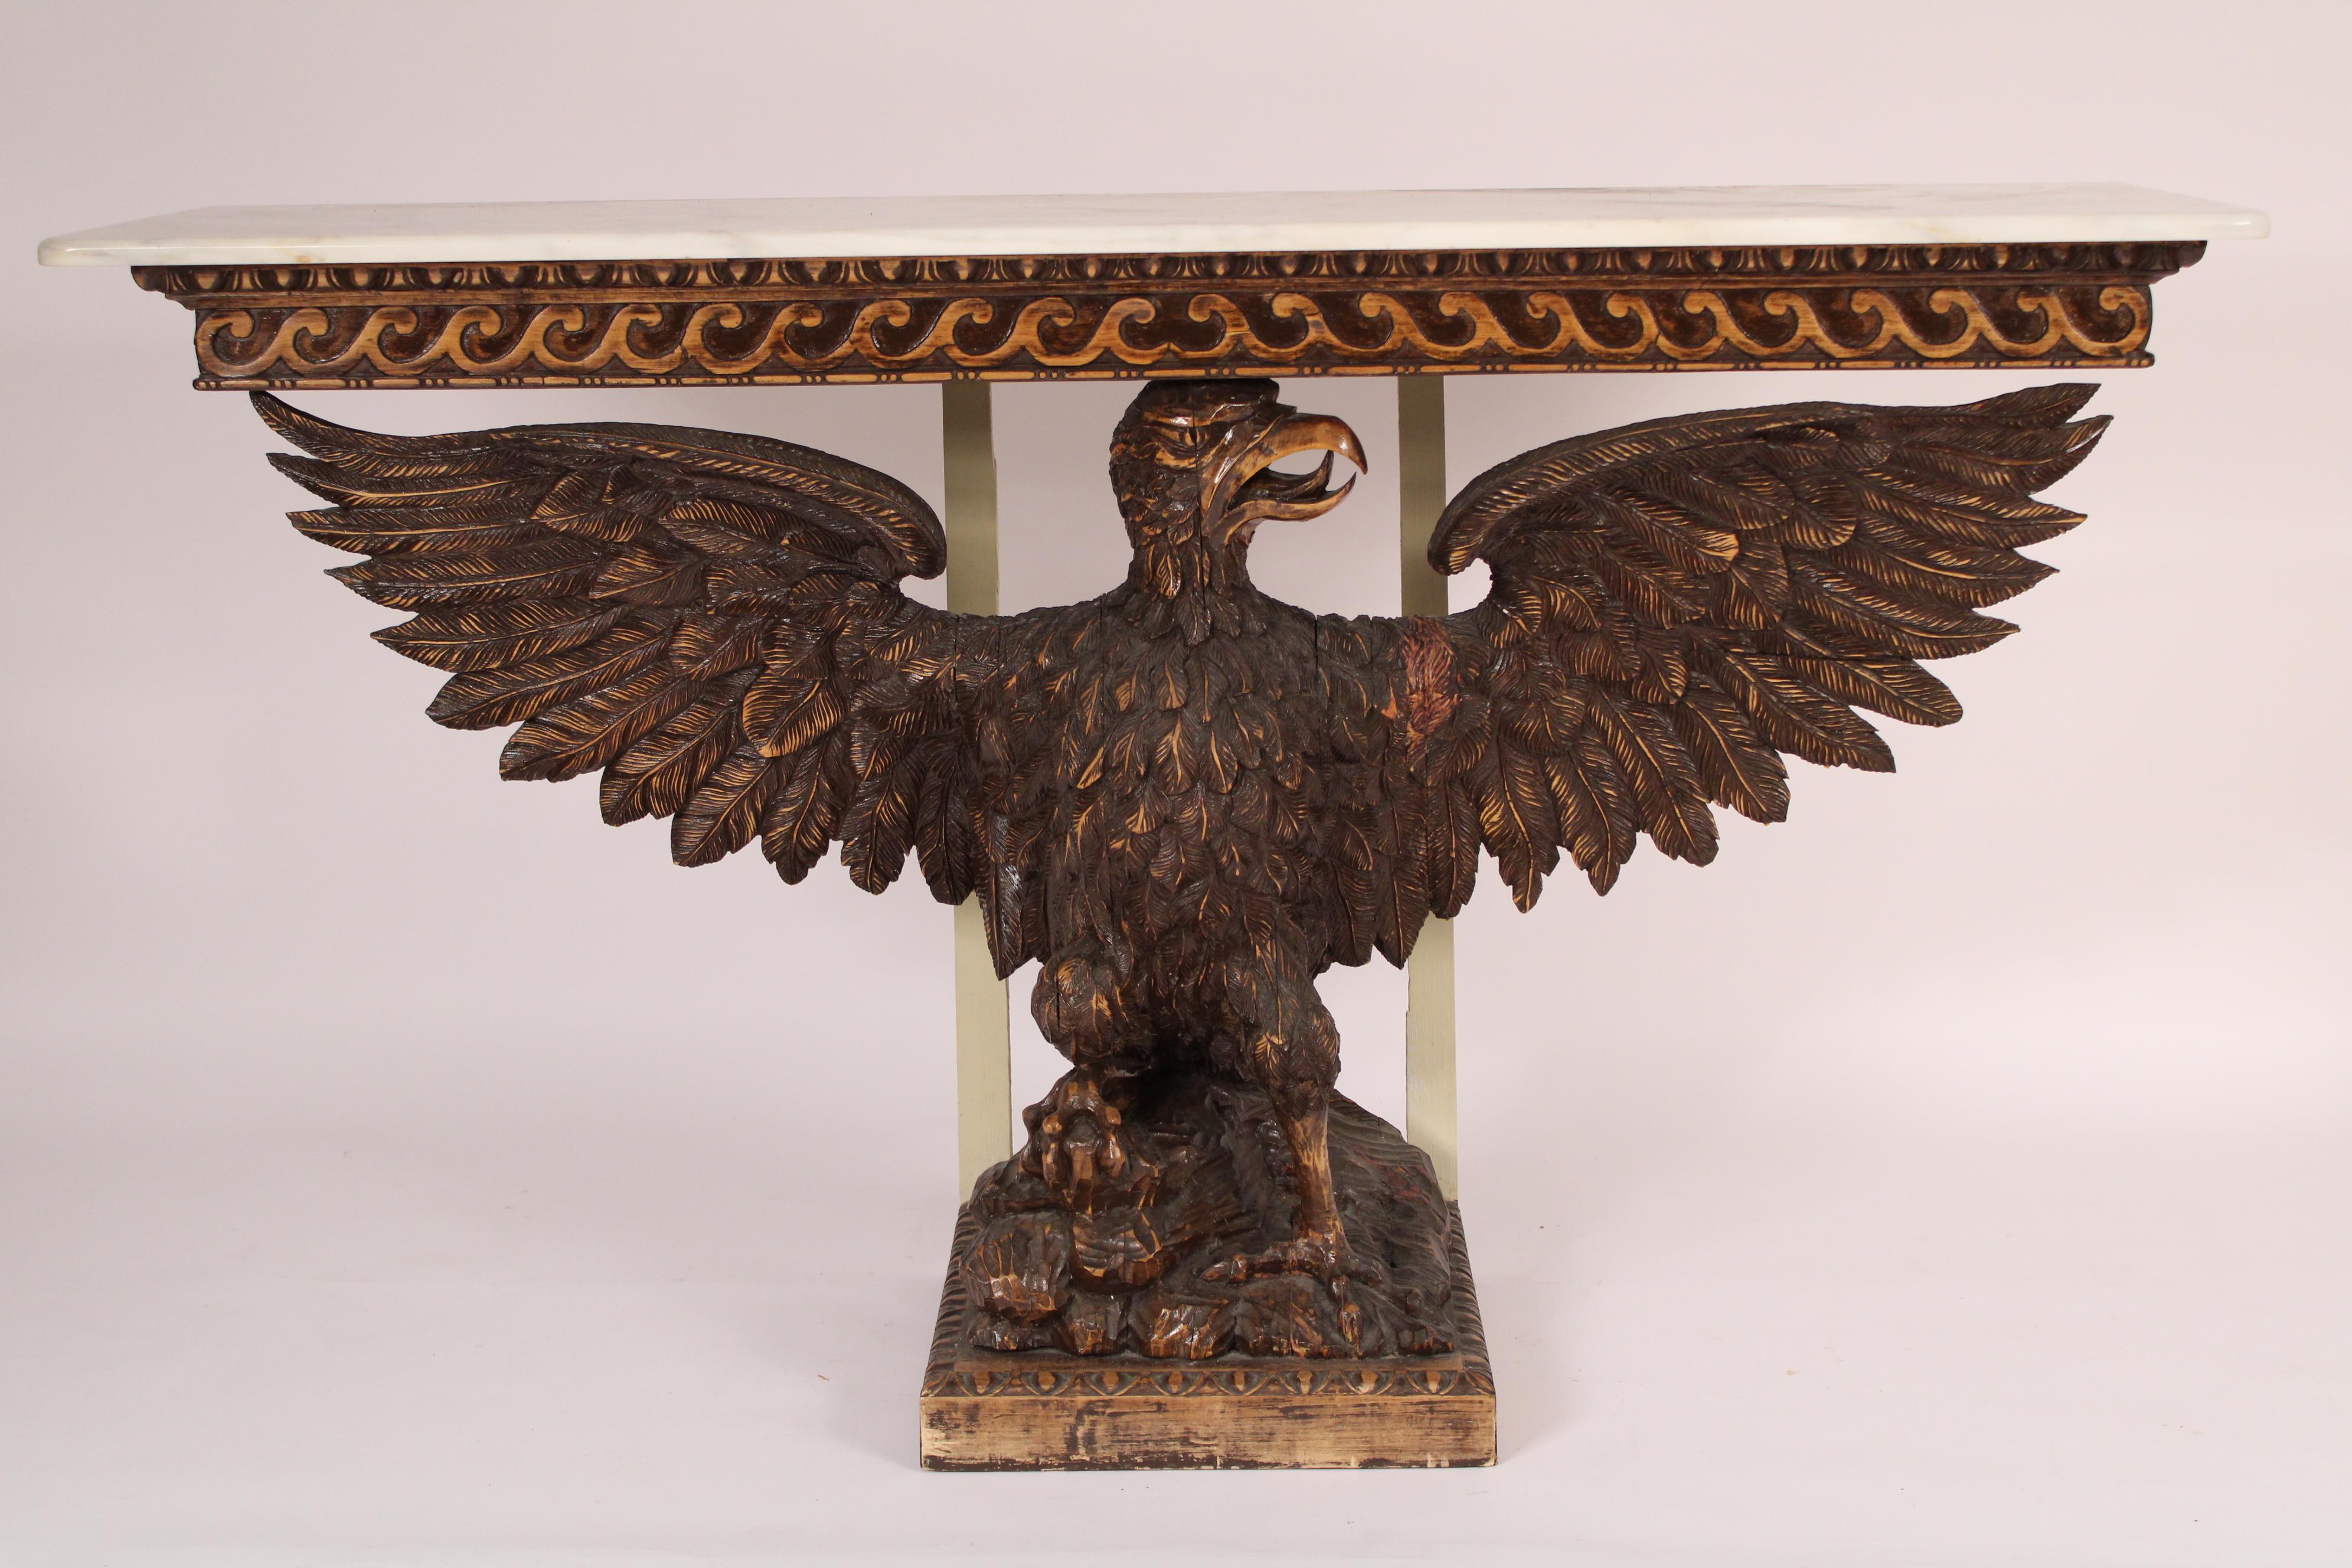 Neo classical style wood carved eagle form console table with a marble top, circa 1950's. With a rectangular white marble top with rounded front corners, a wood carved eagle with wings expanded standing on a rock work base resting on a plinth base